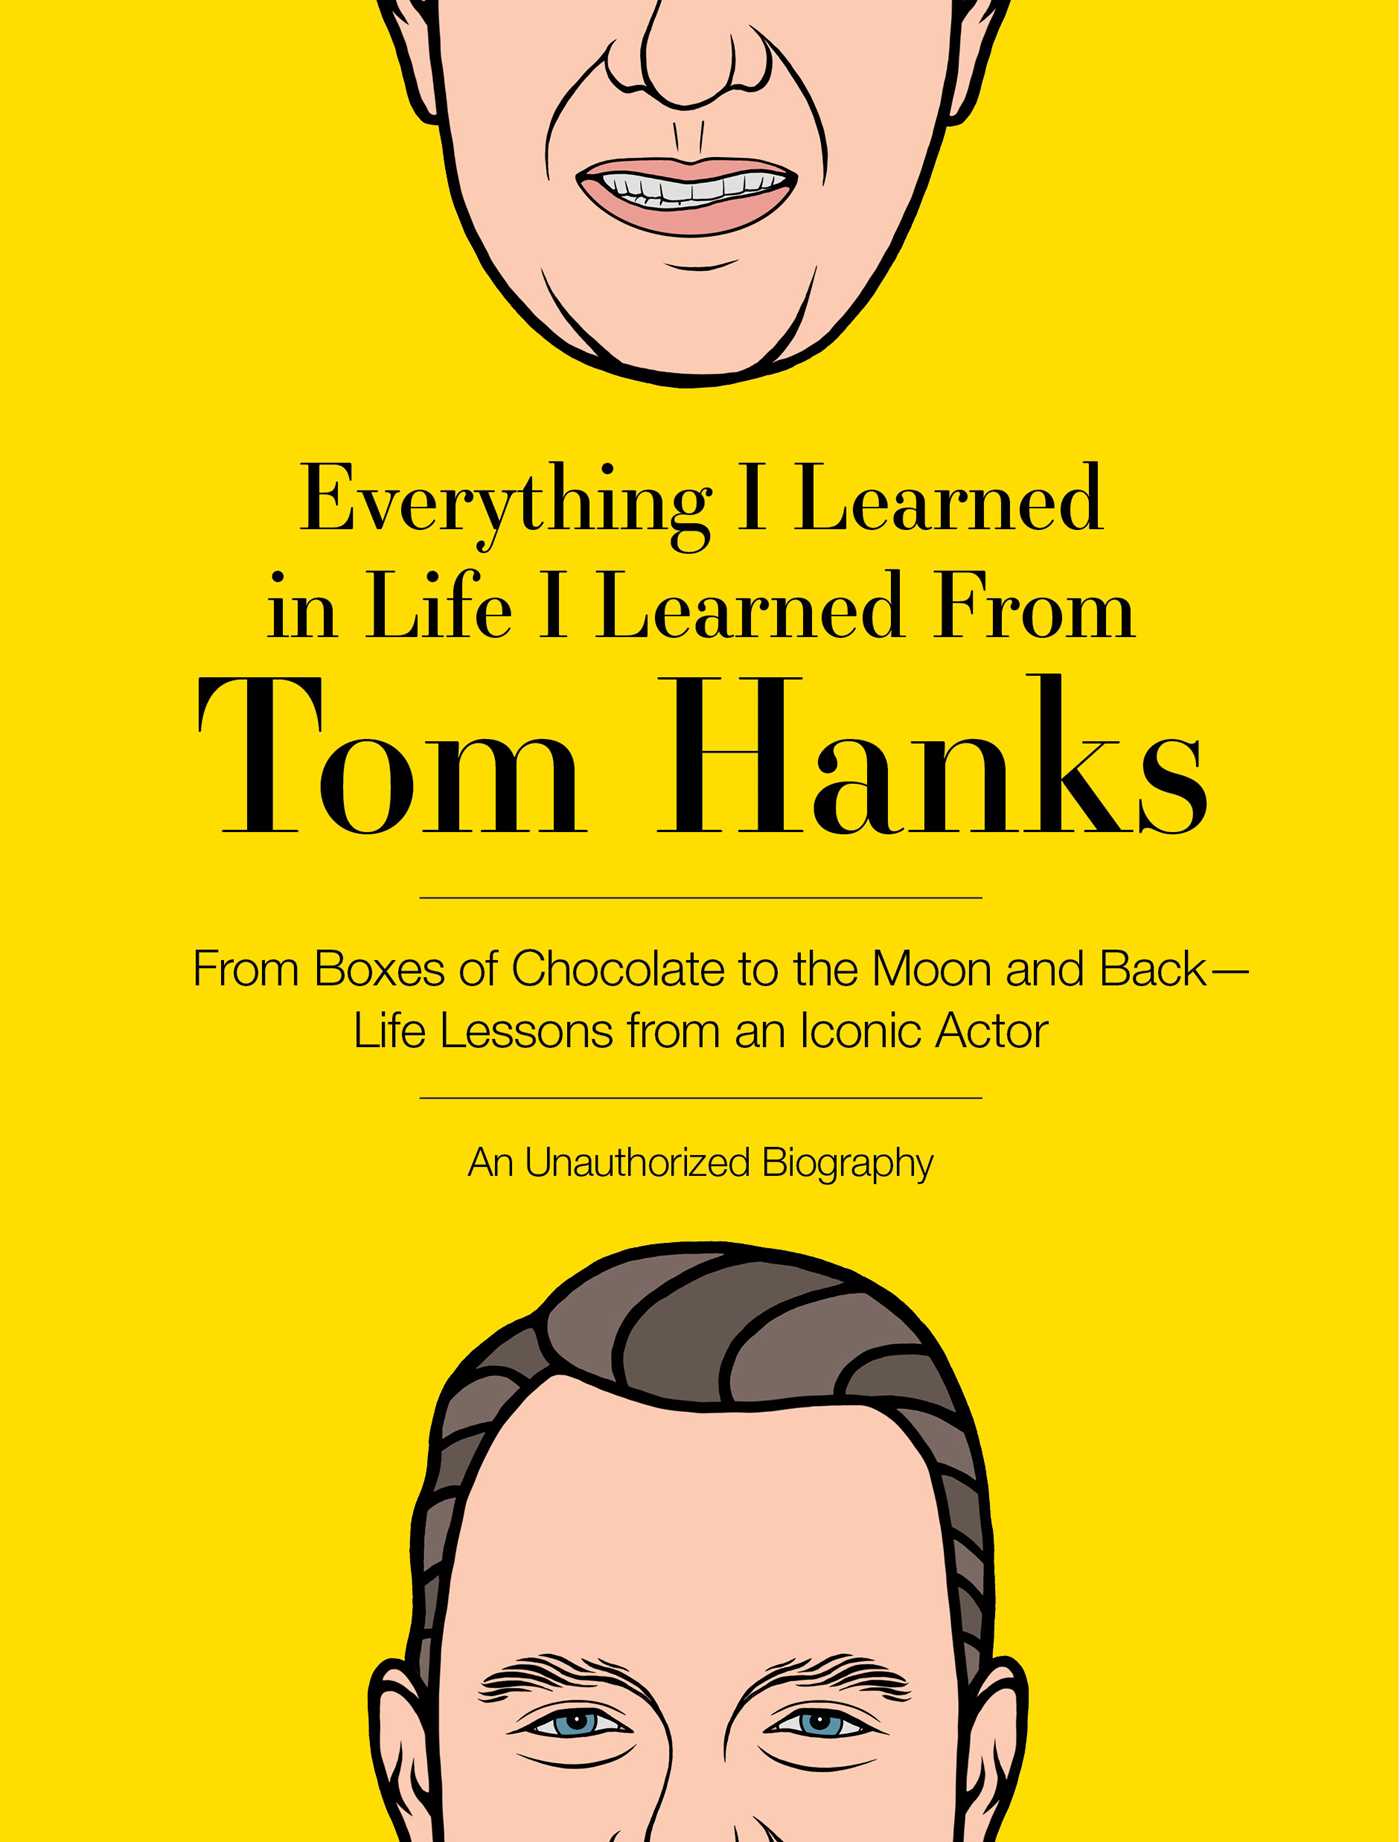 Everything I Learned in Life I Learned From Tom Hanks : From Boxes of Chocolate to Infinity and Beyond - Life Lessons From An Iconic Actor: An Unauthorized Biography